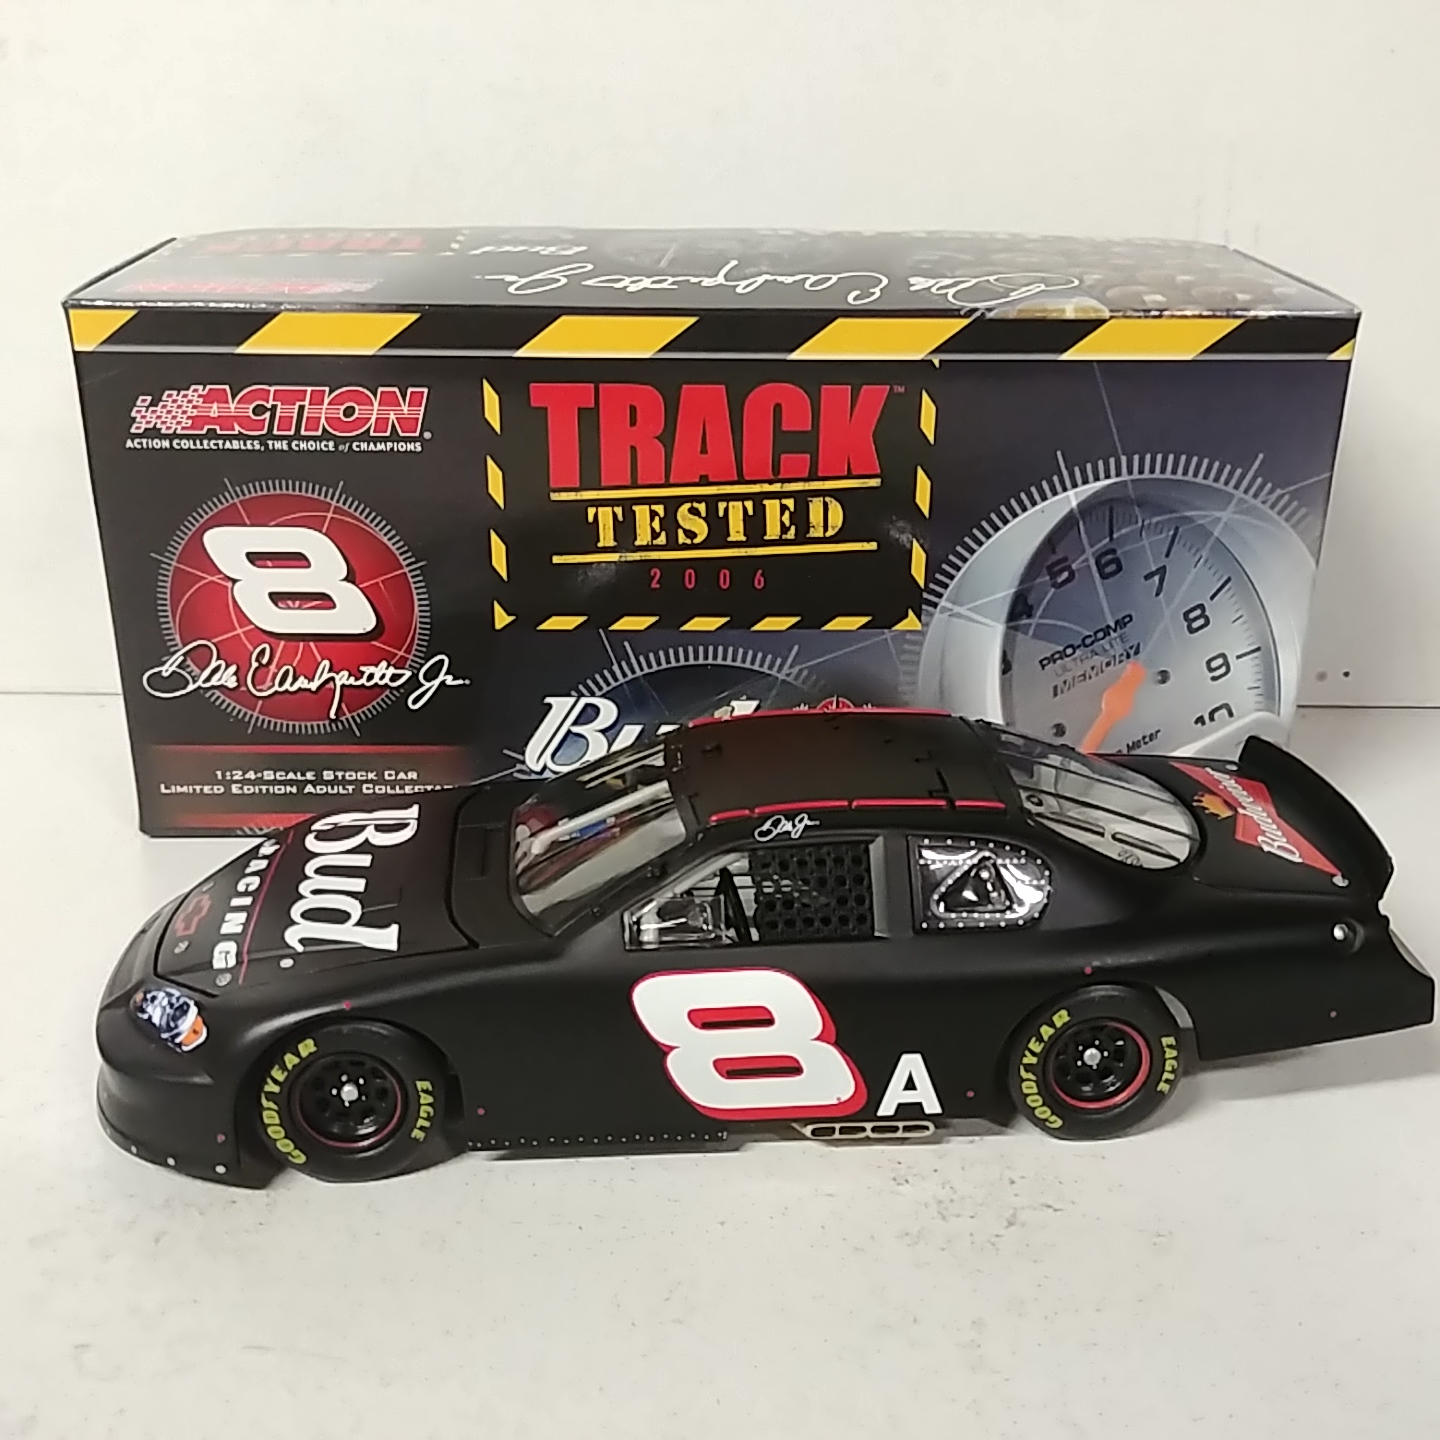 2006 Dale Earnhardt Jr 1/24th Budweiser "Track Tested" Monte Carlo SS